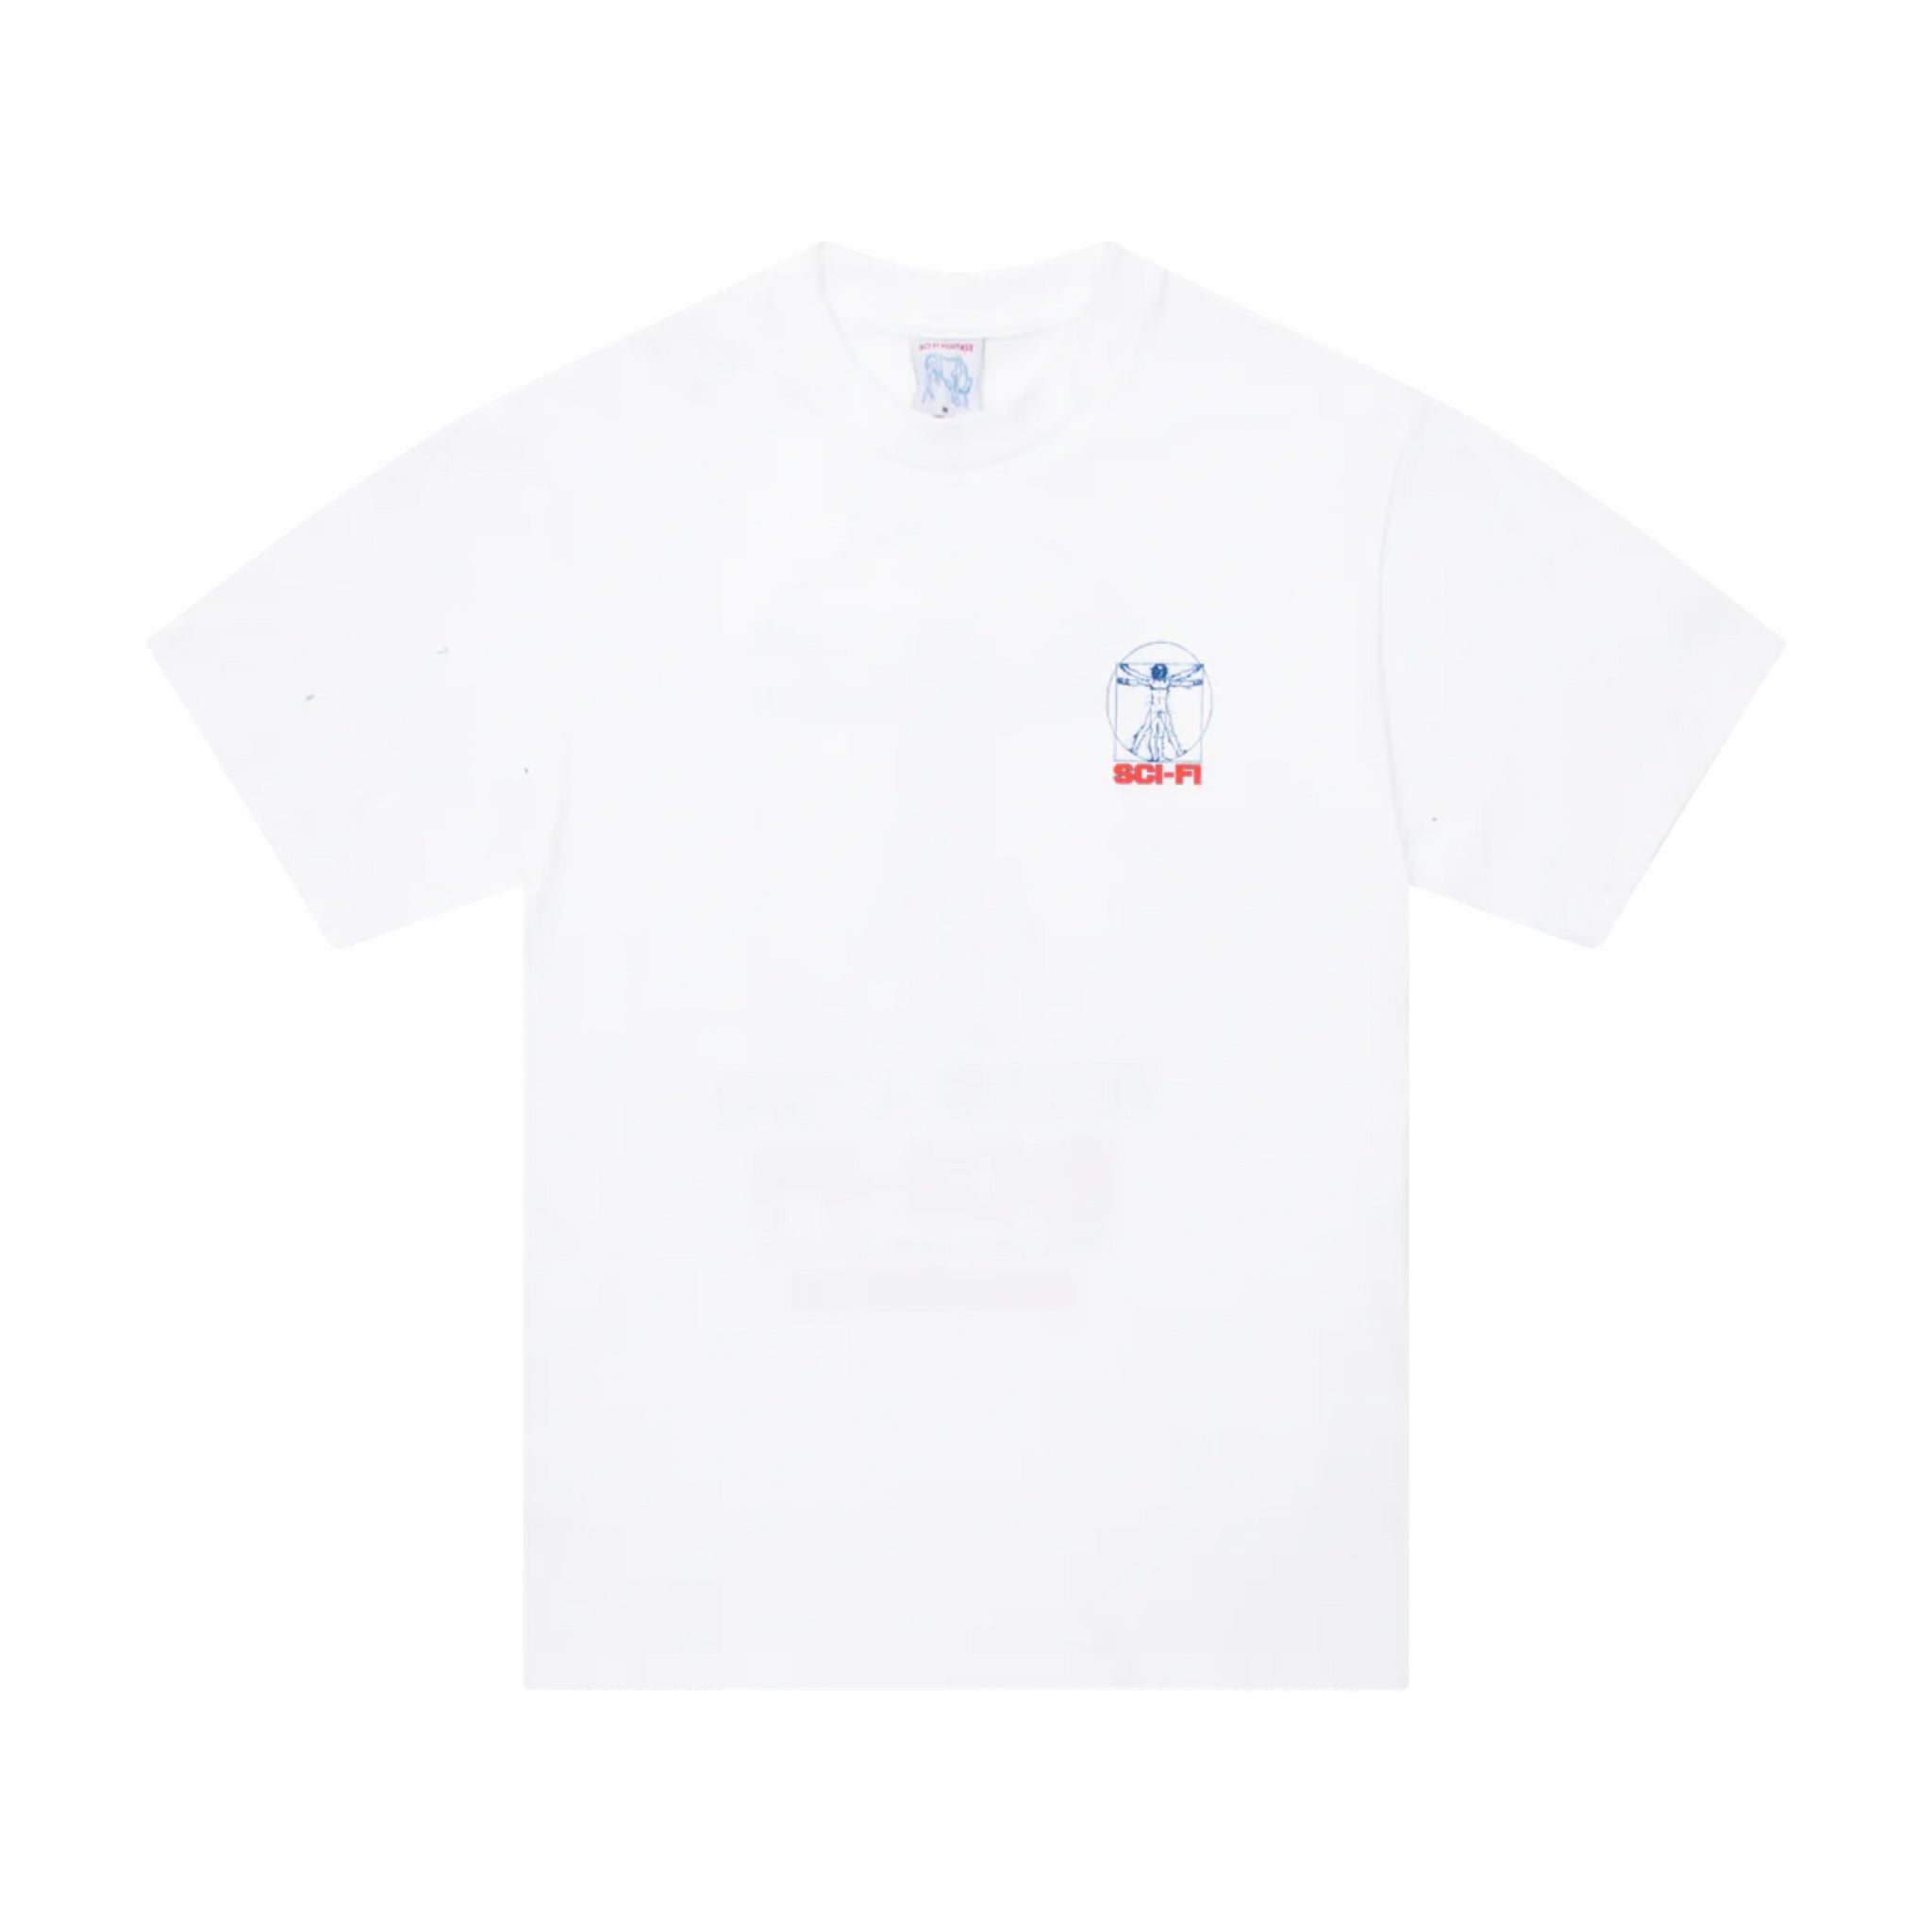 Sci-Fi Fantasy Chain of Being 2 Tee (White) - August Shop